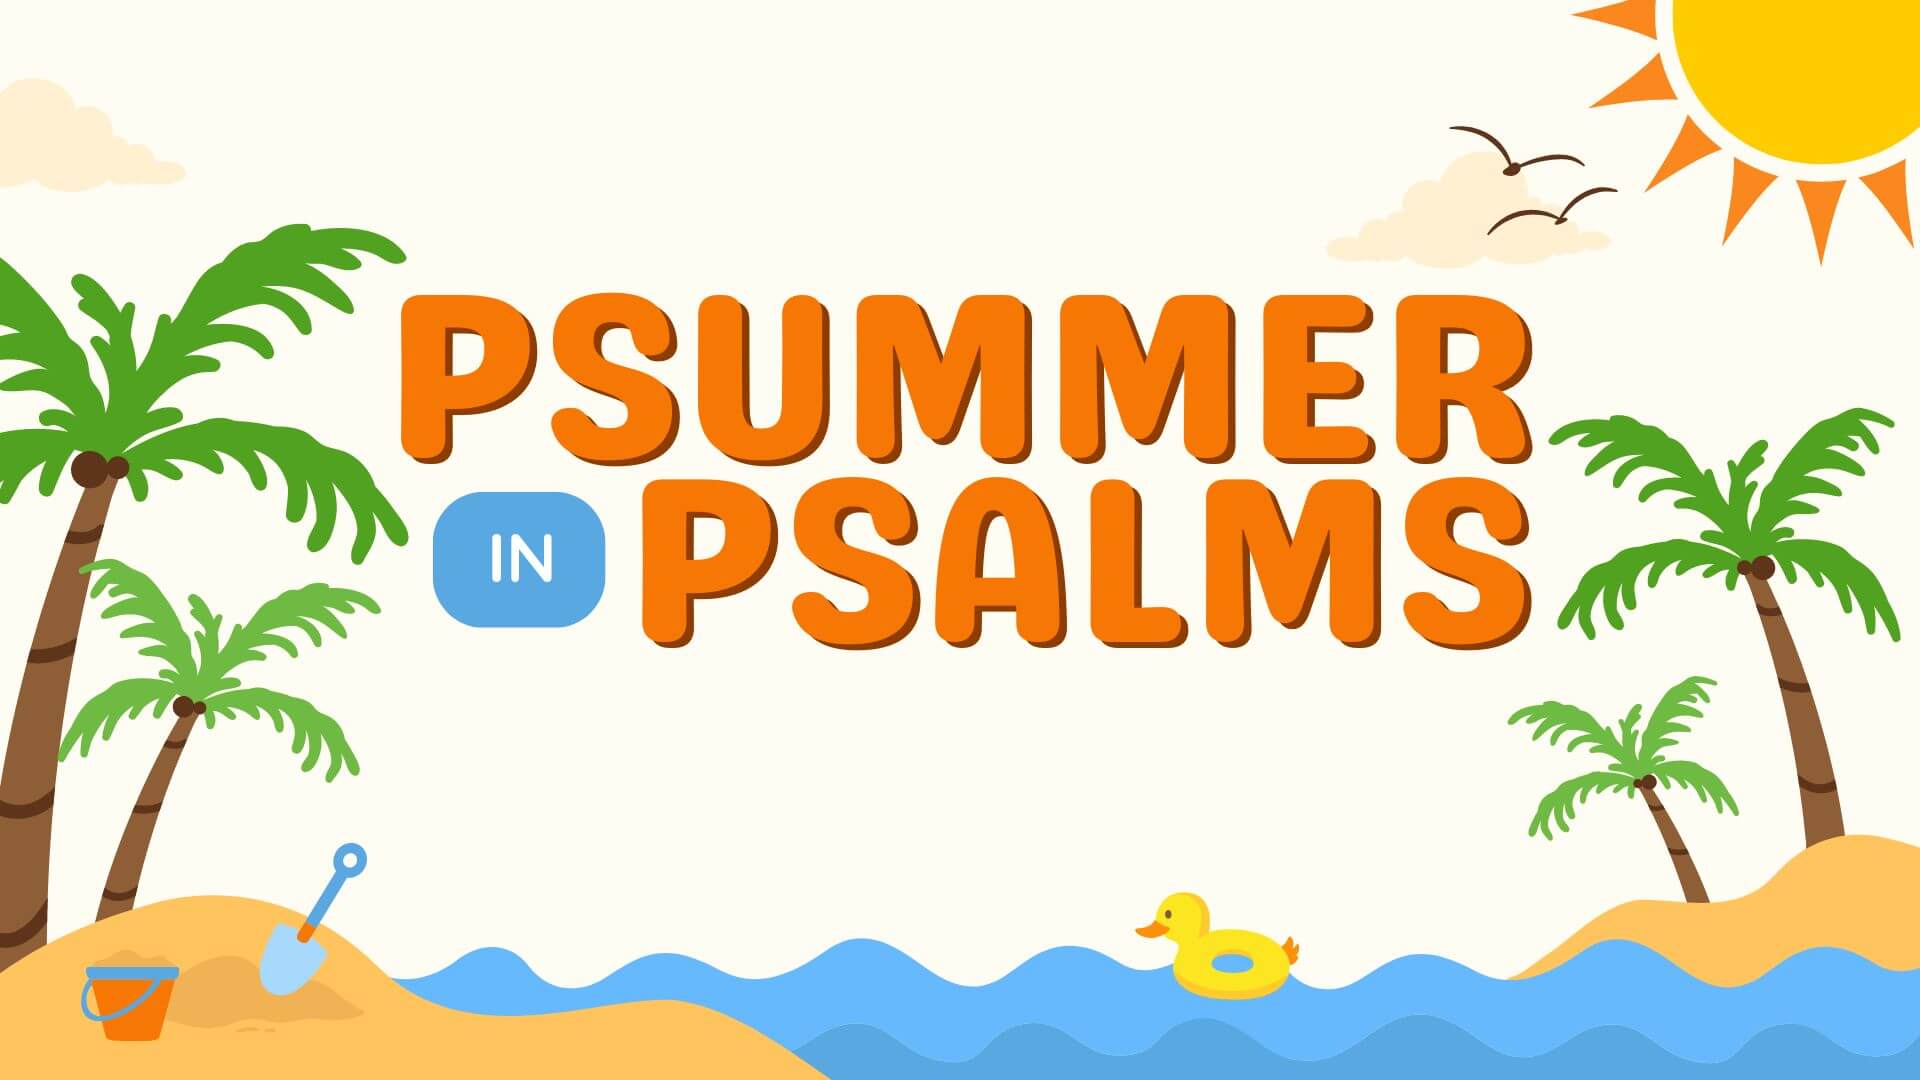 Psummer in Psalms: Life Lessons from Psalm One